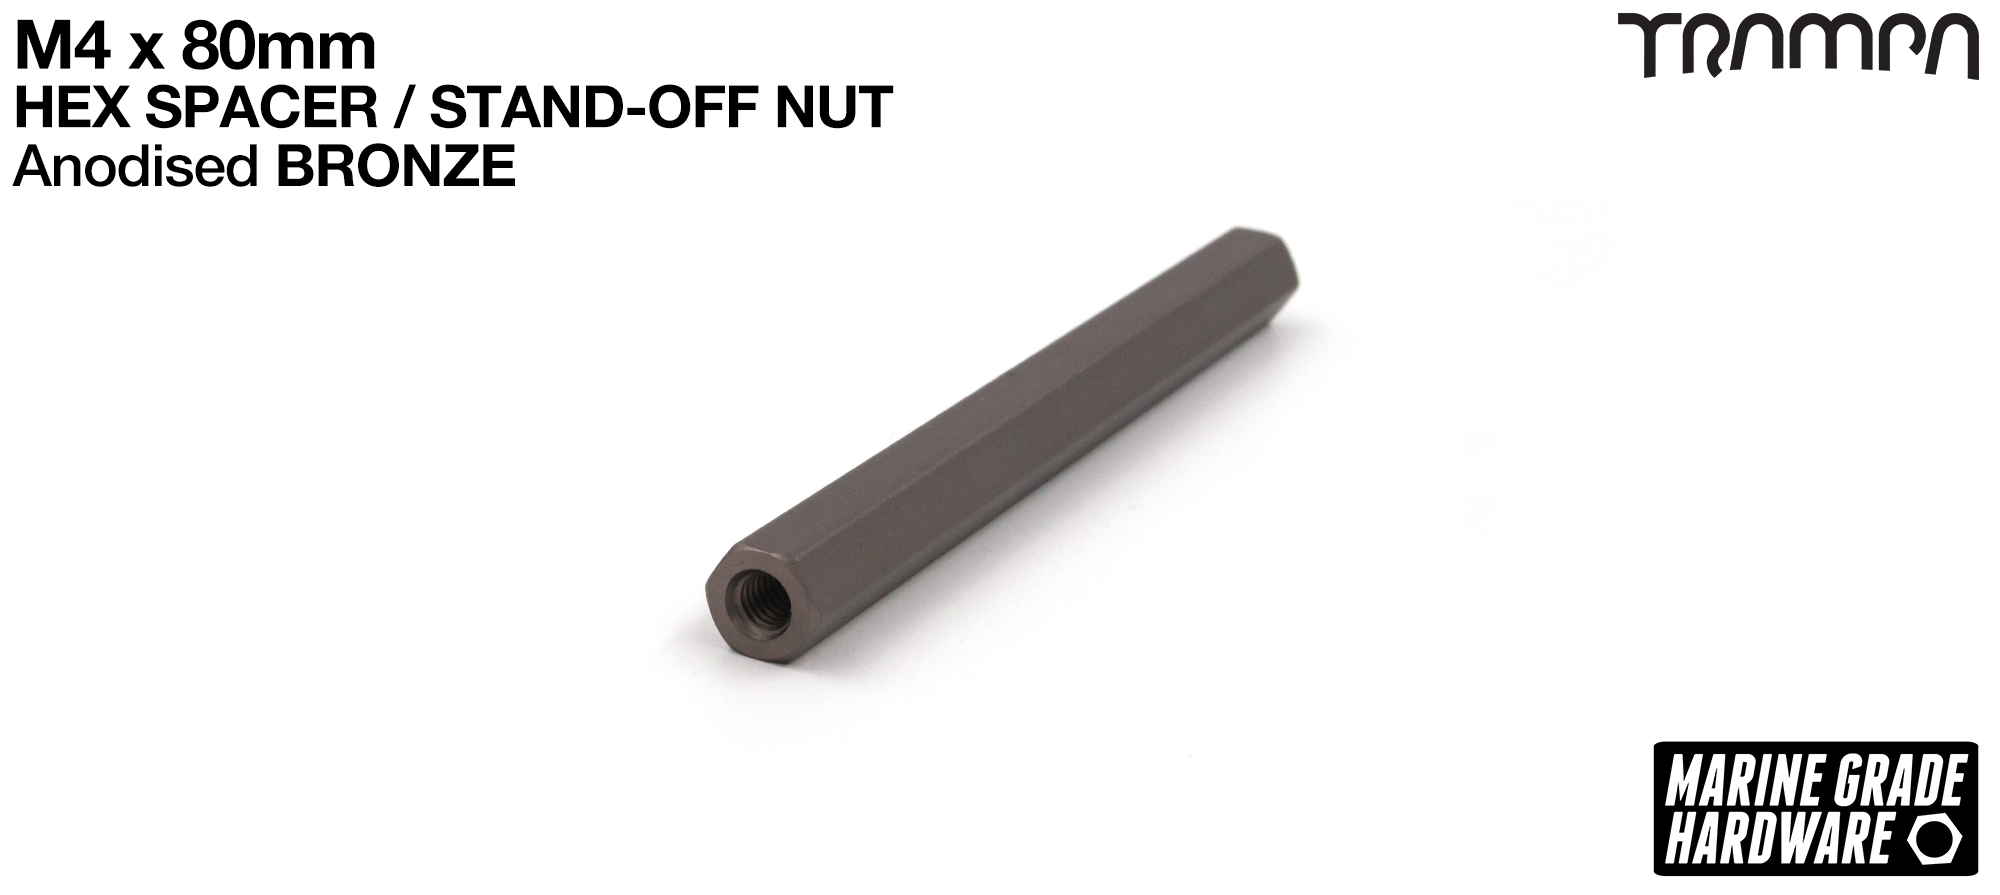 M4 x 80mm Aluminium Threaded Spacer Nut Used for assembling the BEAST Battery Boxes - BRONZE